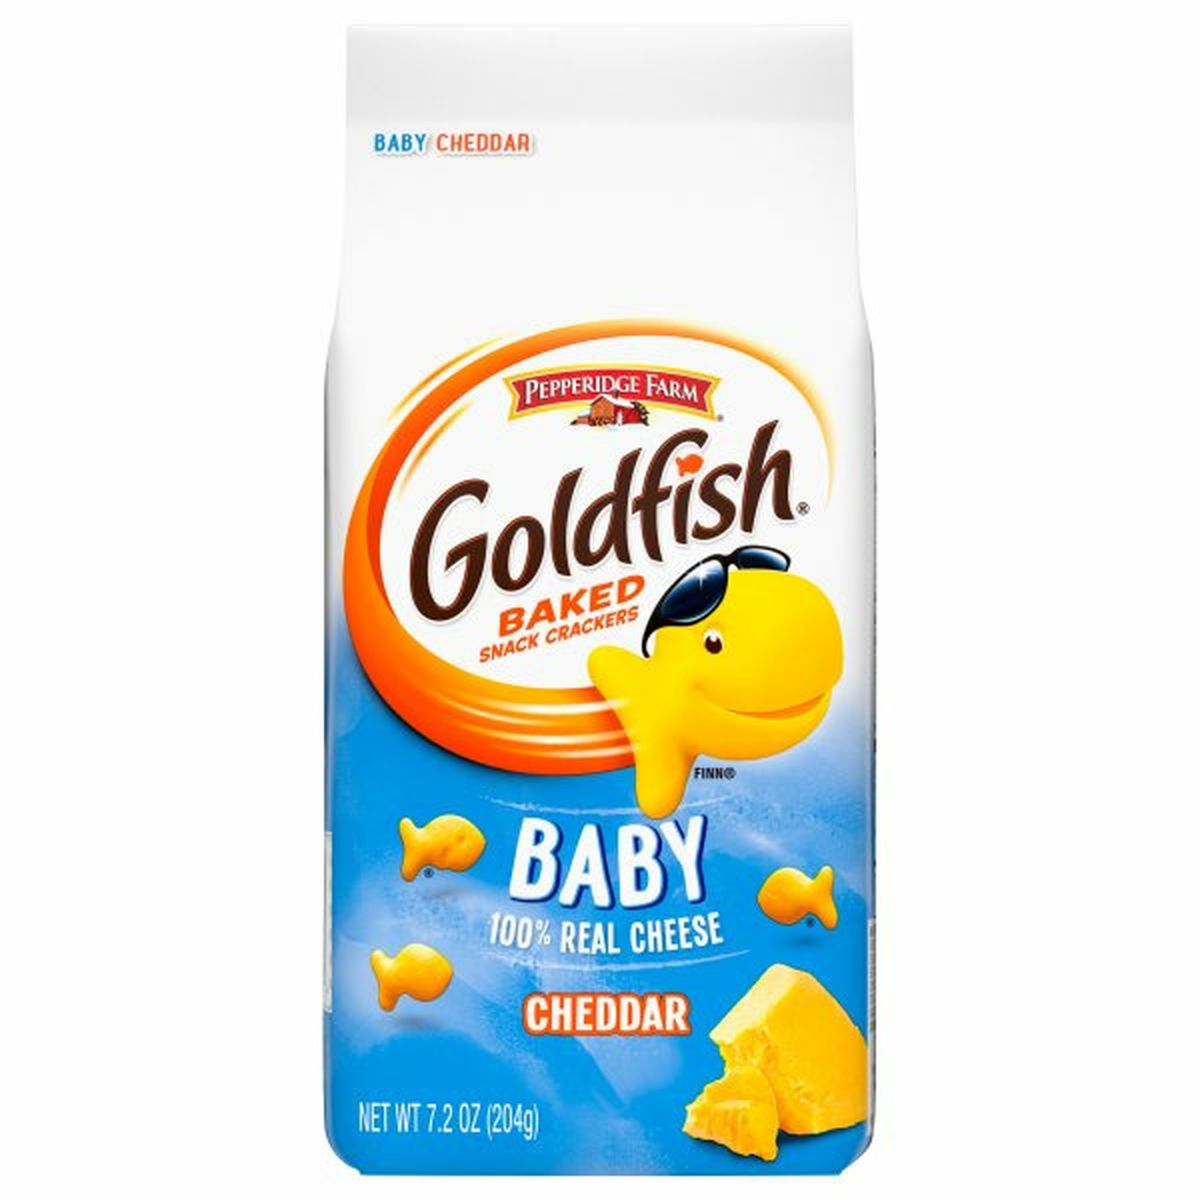 Calories in Pepperidge Farms  Goldfishs Snack Crackers, Cheddar, Baby, Baked